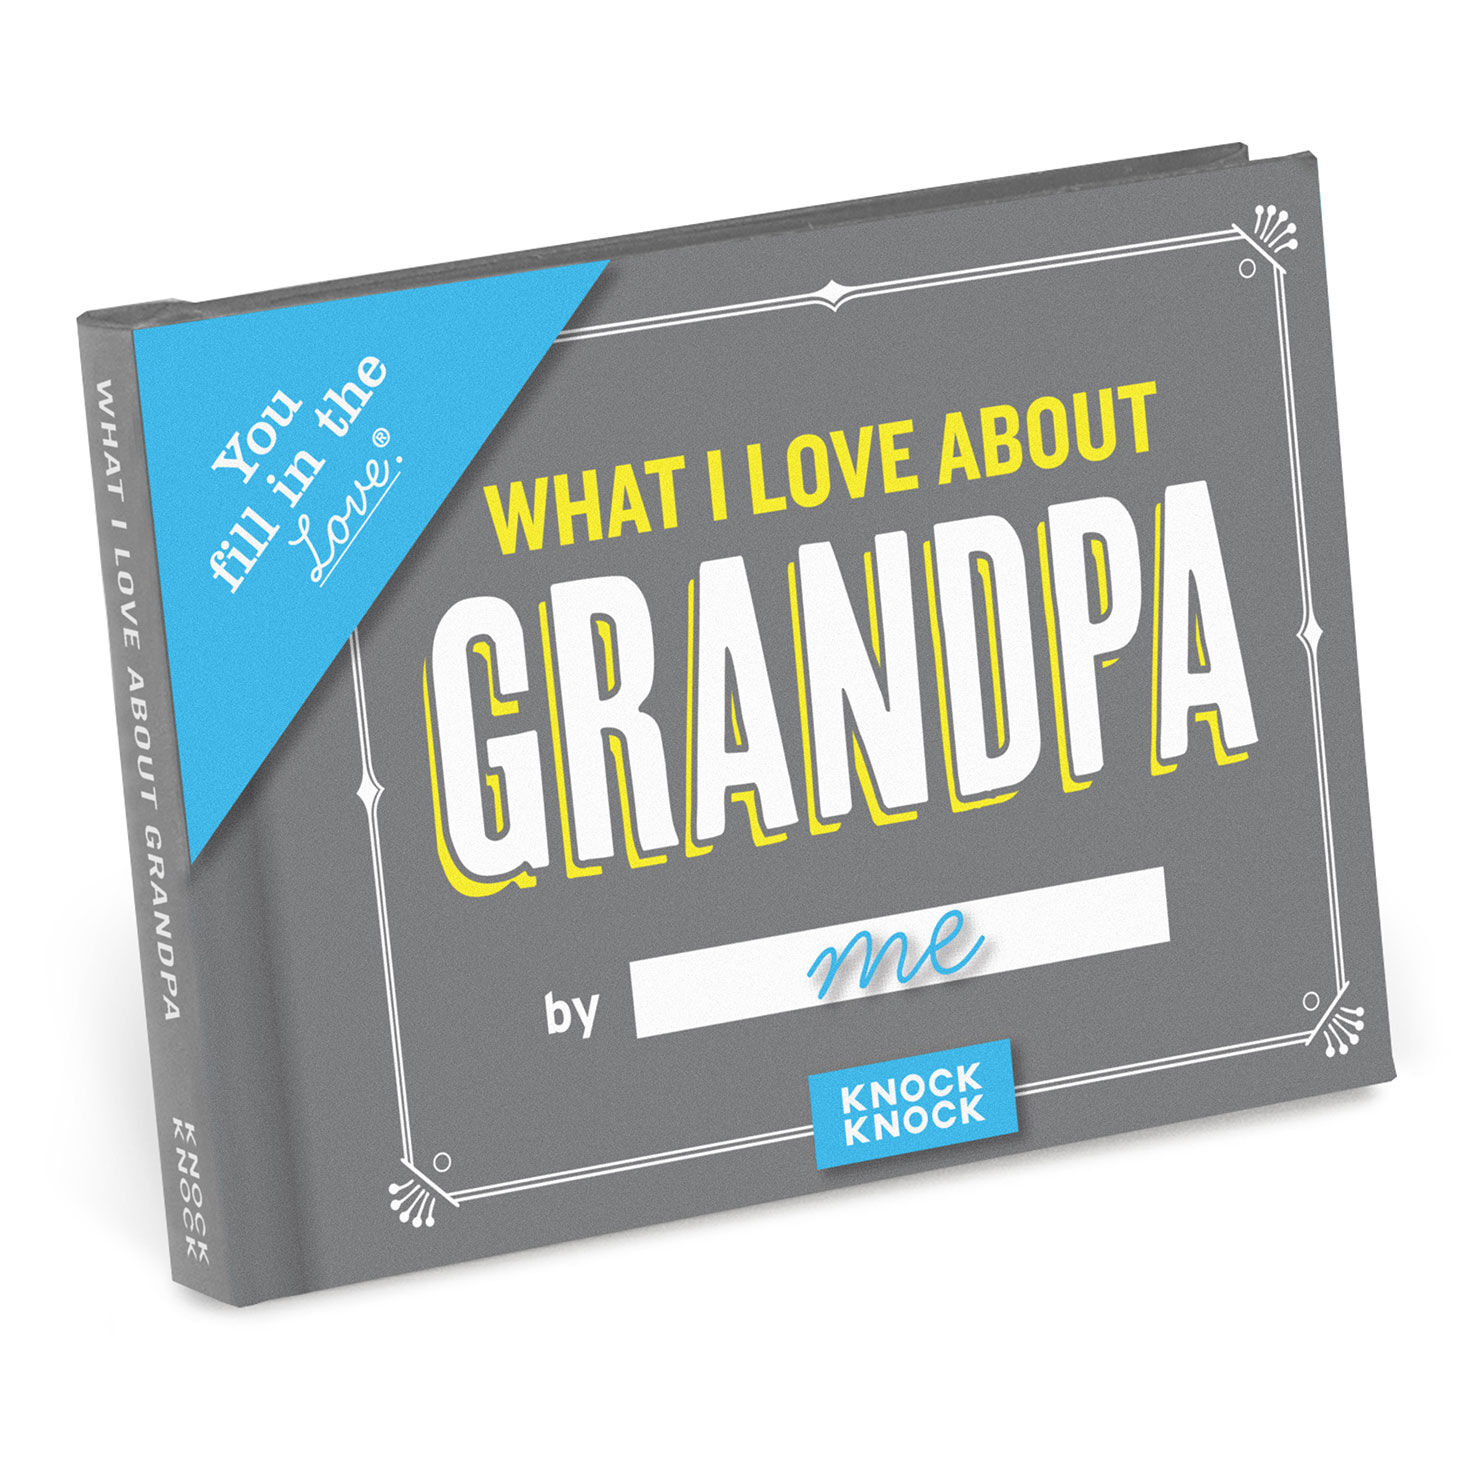 https://www.hallmark.com/dw/image/v2/AALB_PRD/on/demandware.static/-/Sites-hallmark-master/default/dw6288c137/images/finished-goods/products/50260/What-I-Love-About-Grandpa-Personalized-Gift-Book_50260_01.jpg?sfrm=jpg